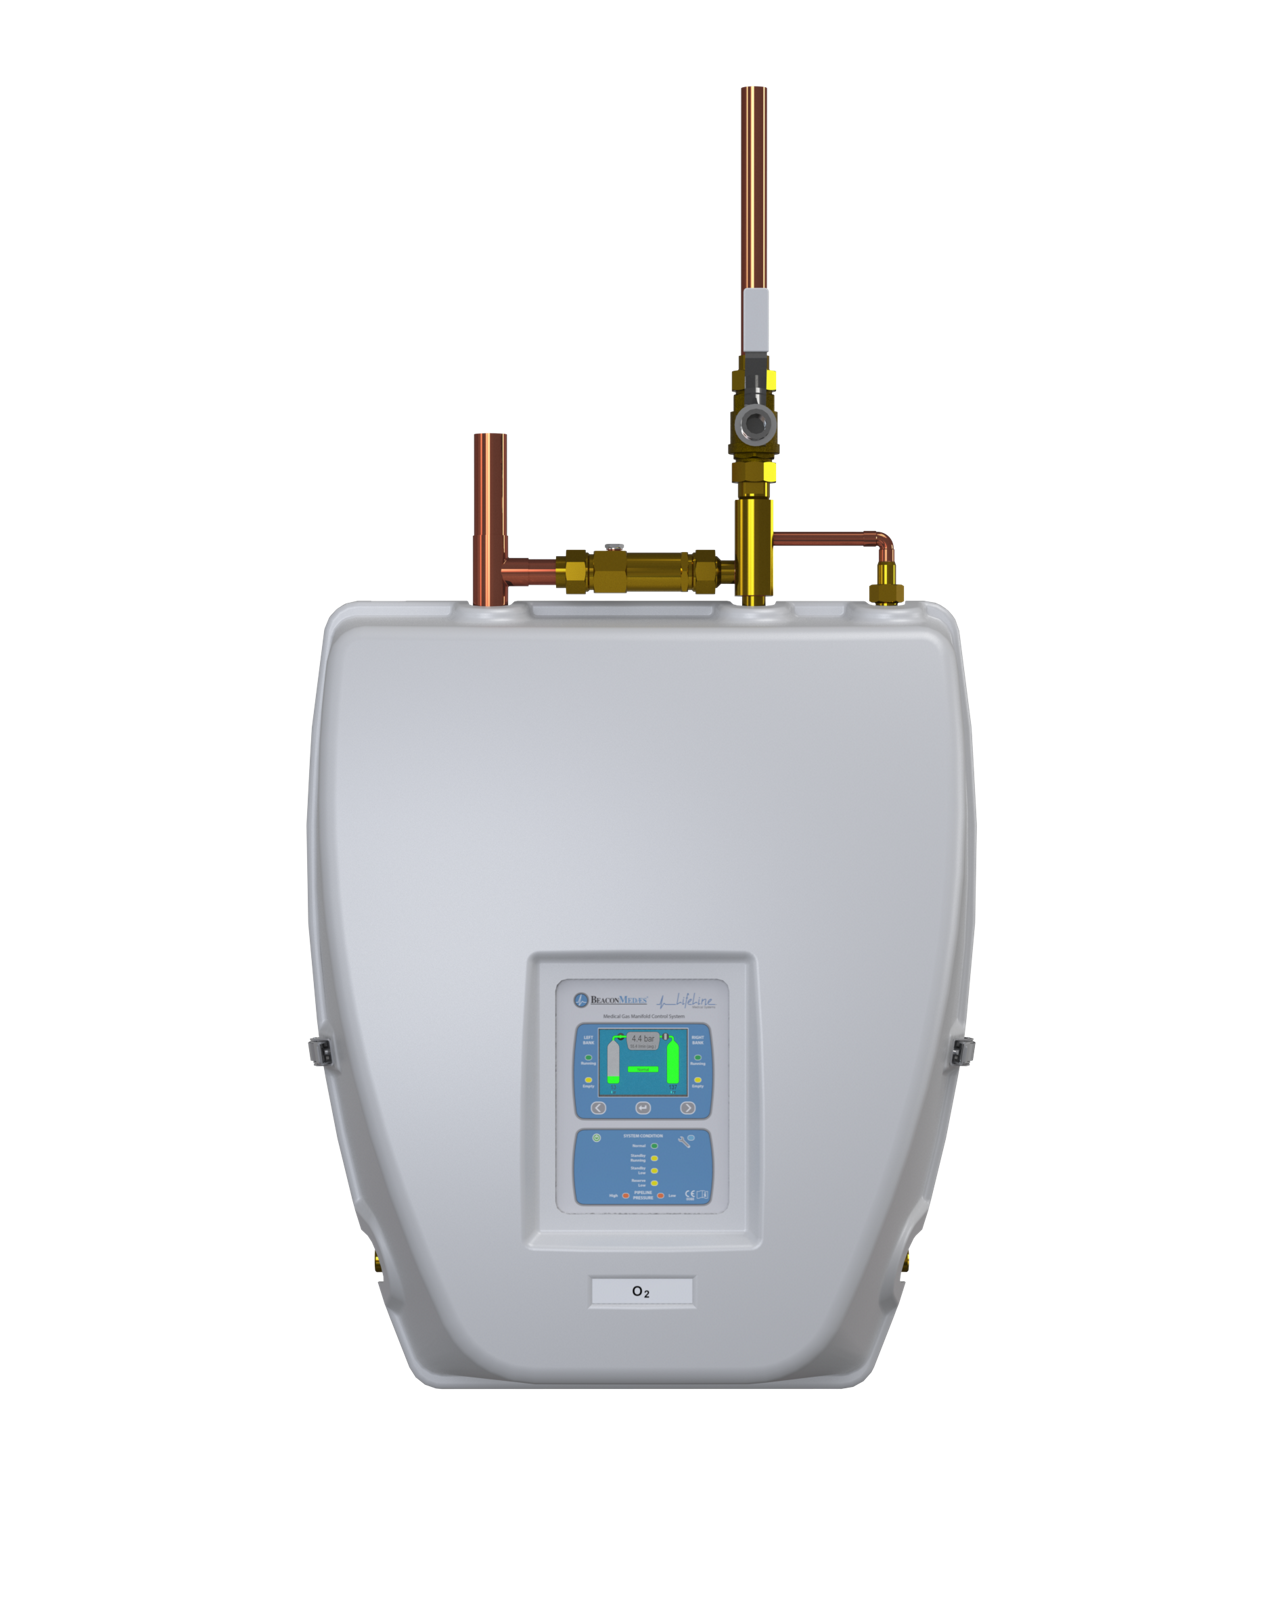 Providers of Reliable Medical Gas Supply Systems